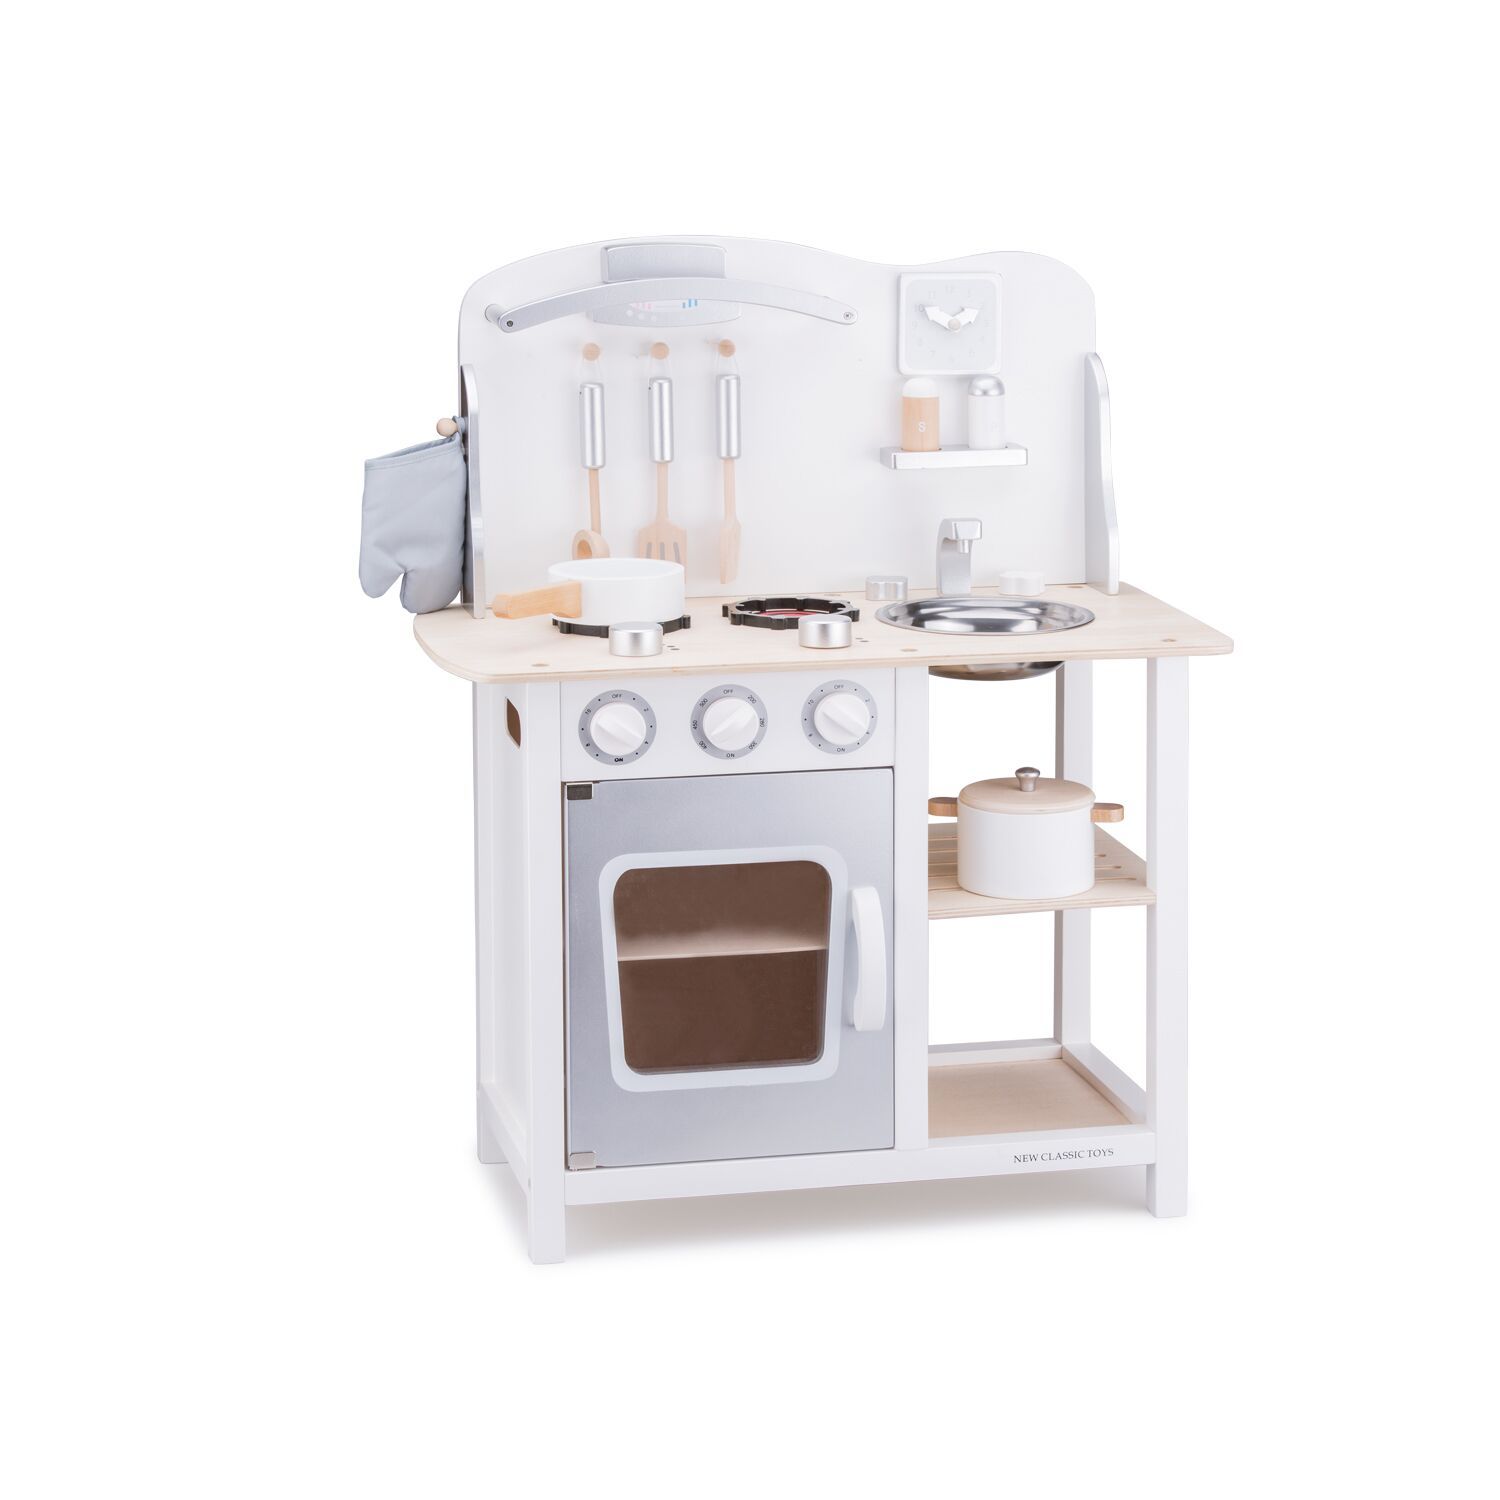 new classic toys kitchen